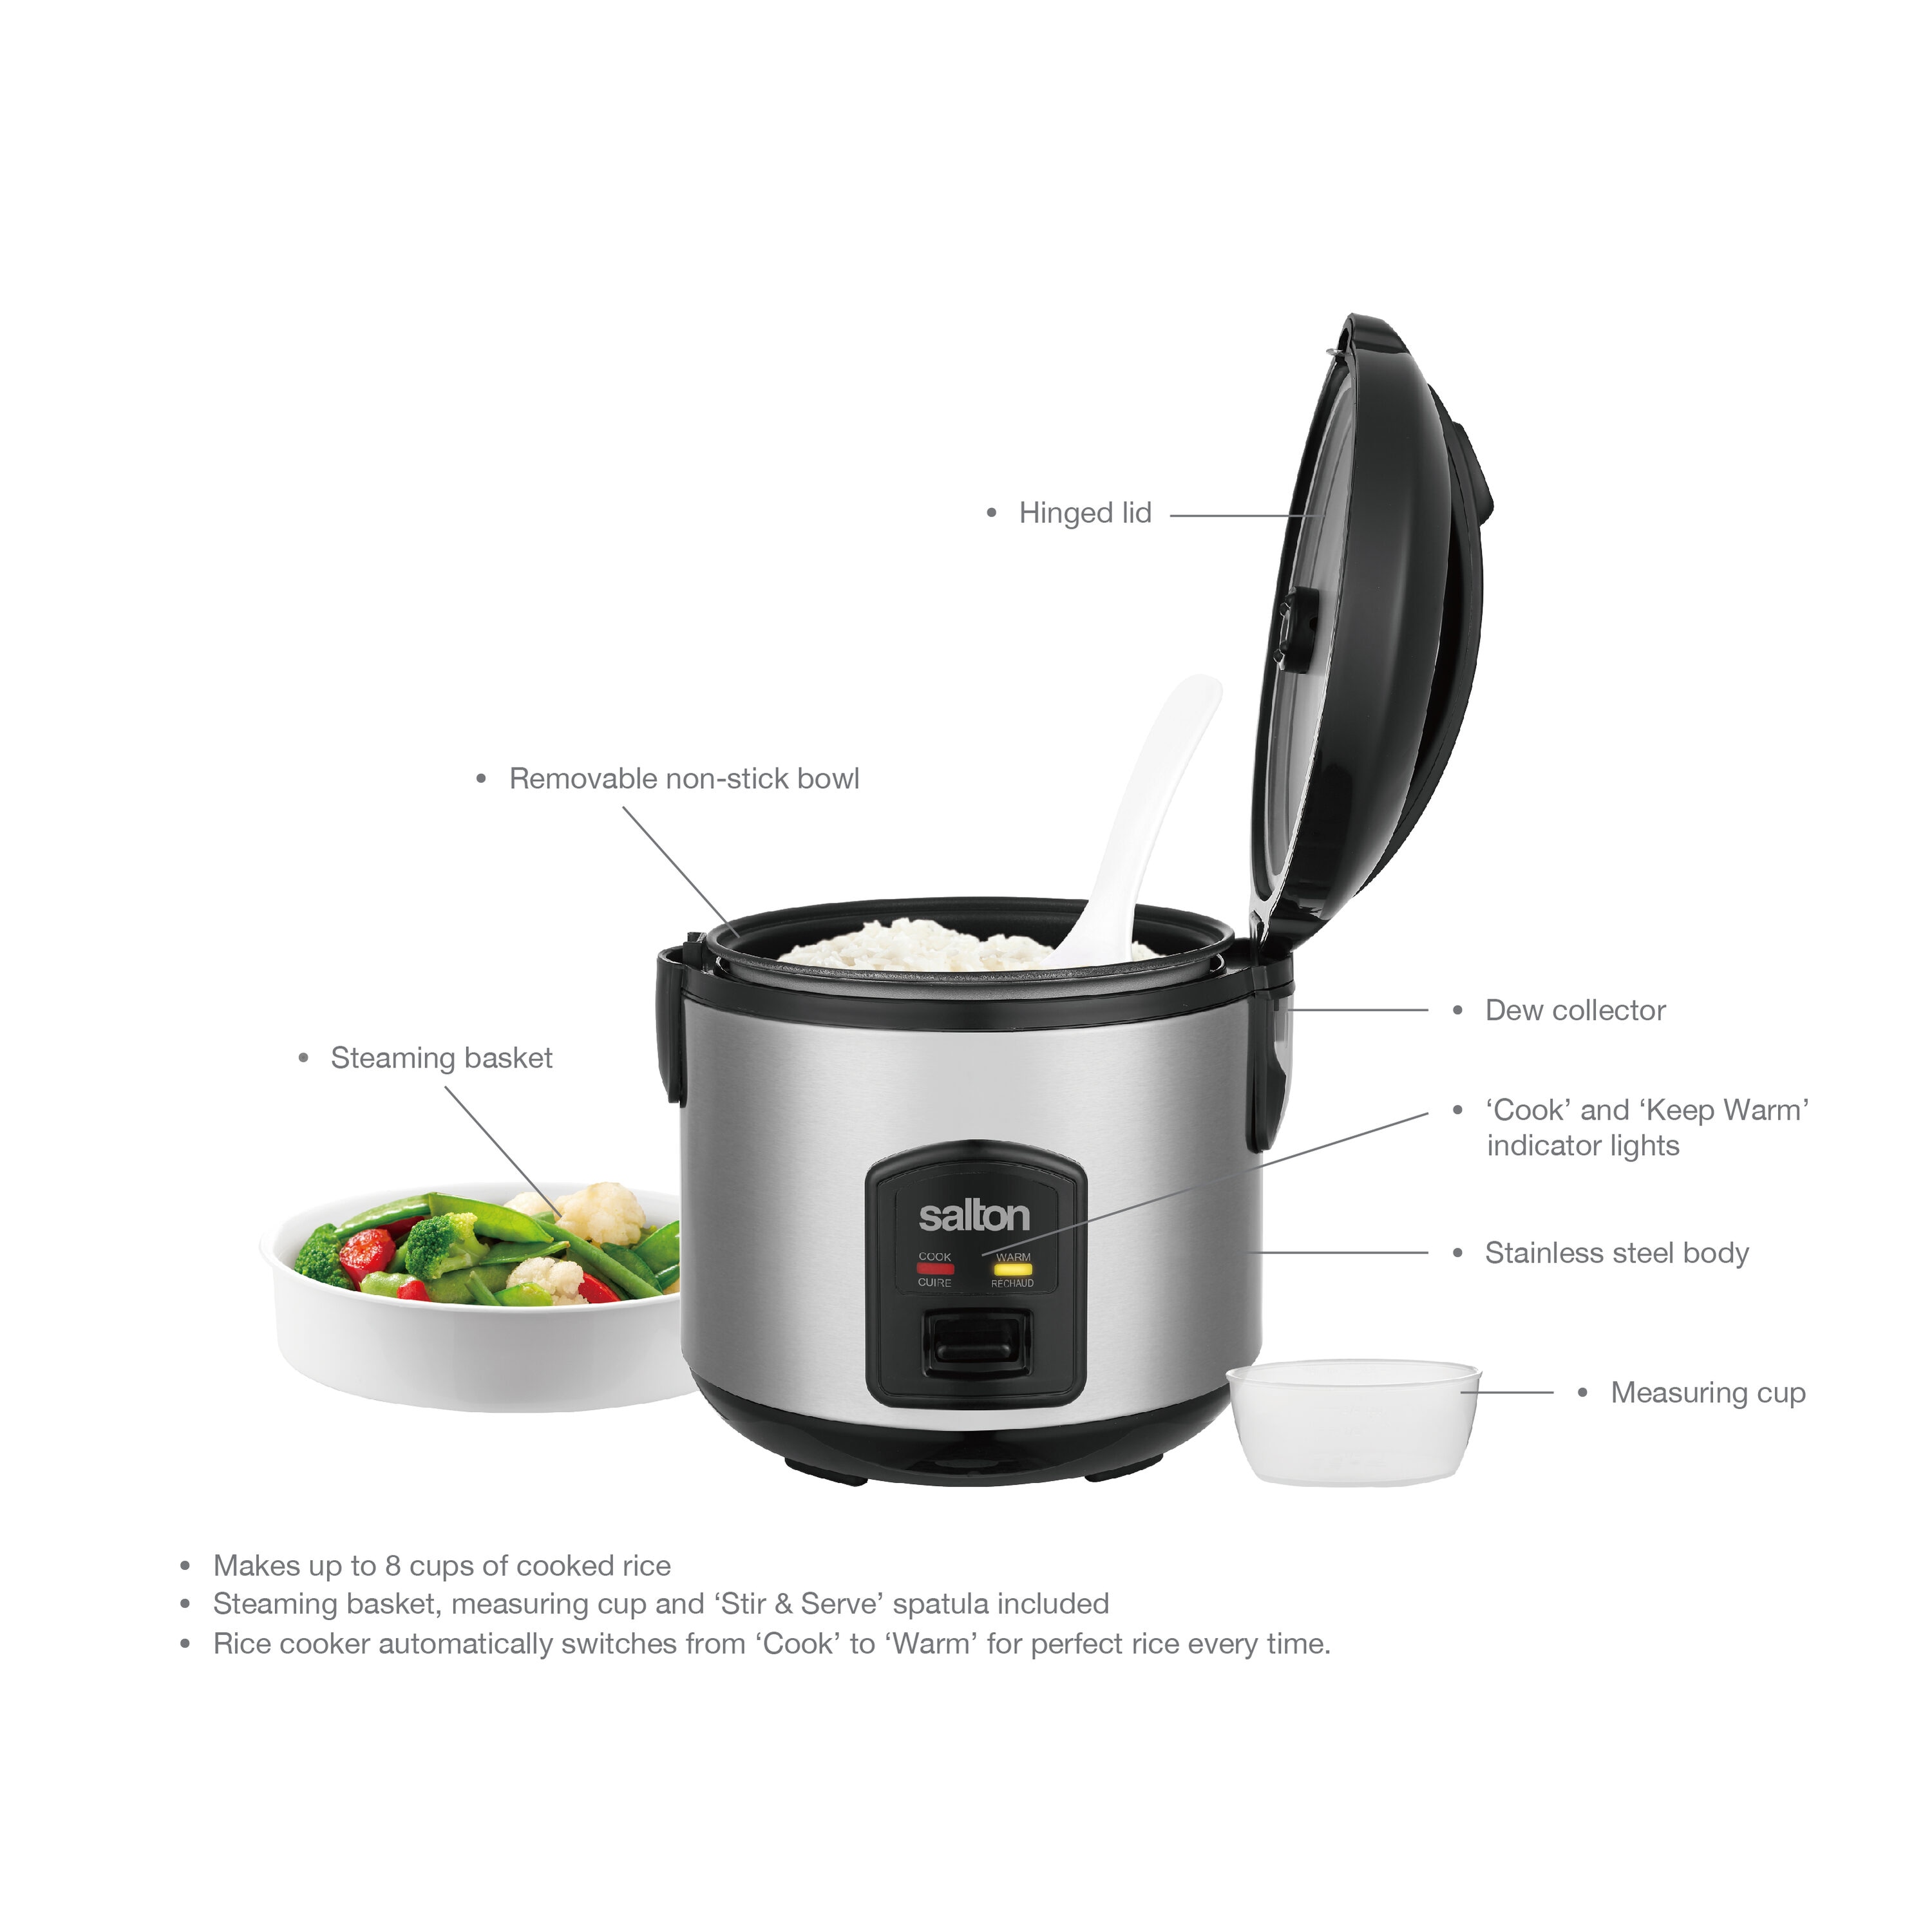 Imusa Electric Rice Cooker with Bowl 8 Cup (Uncooked) 16 Cup